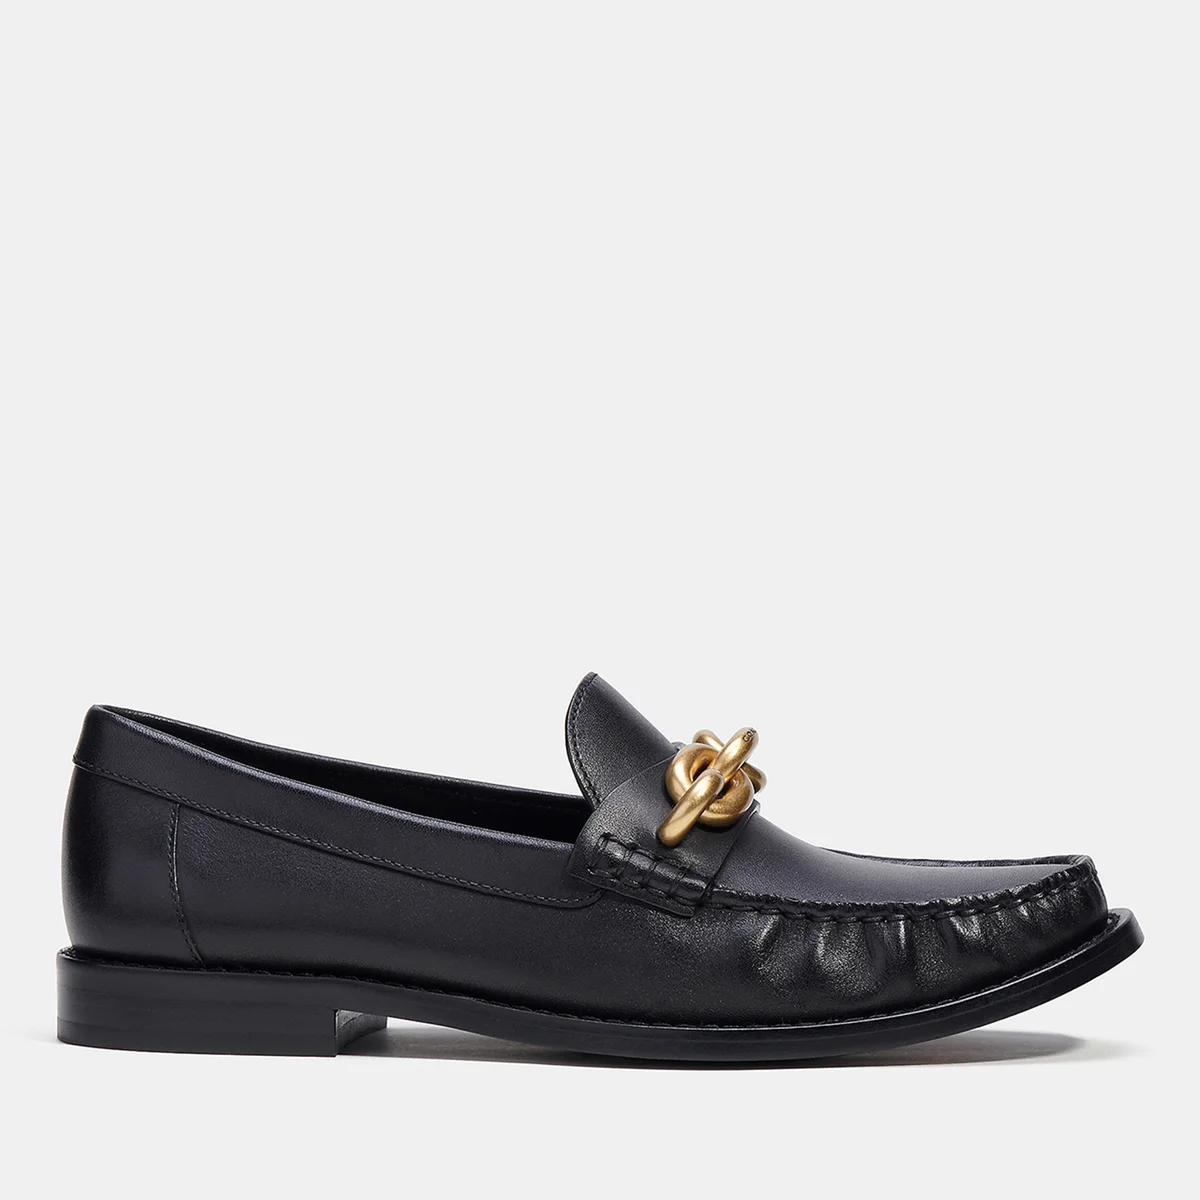 Coach Jess Leather Loafers Image 1